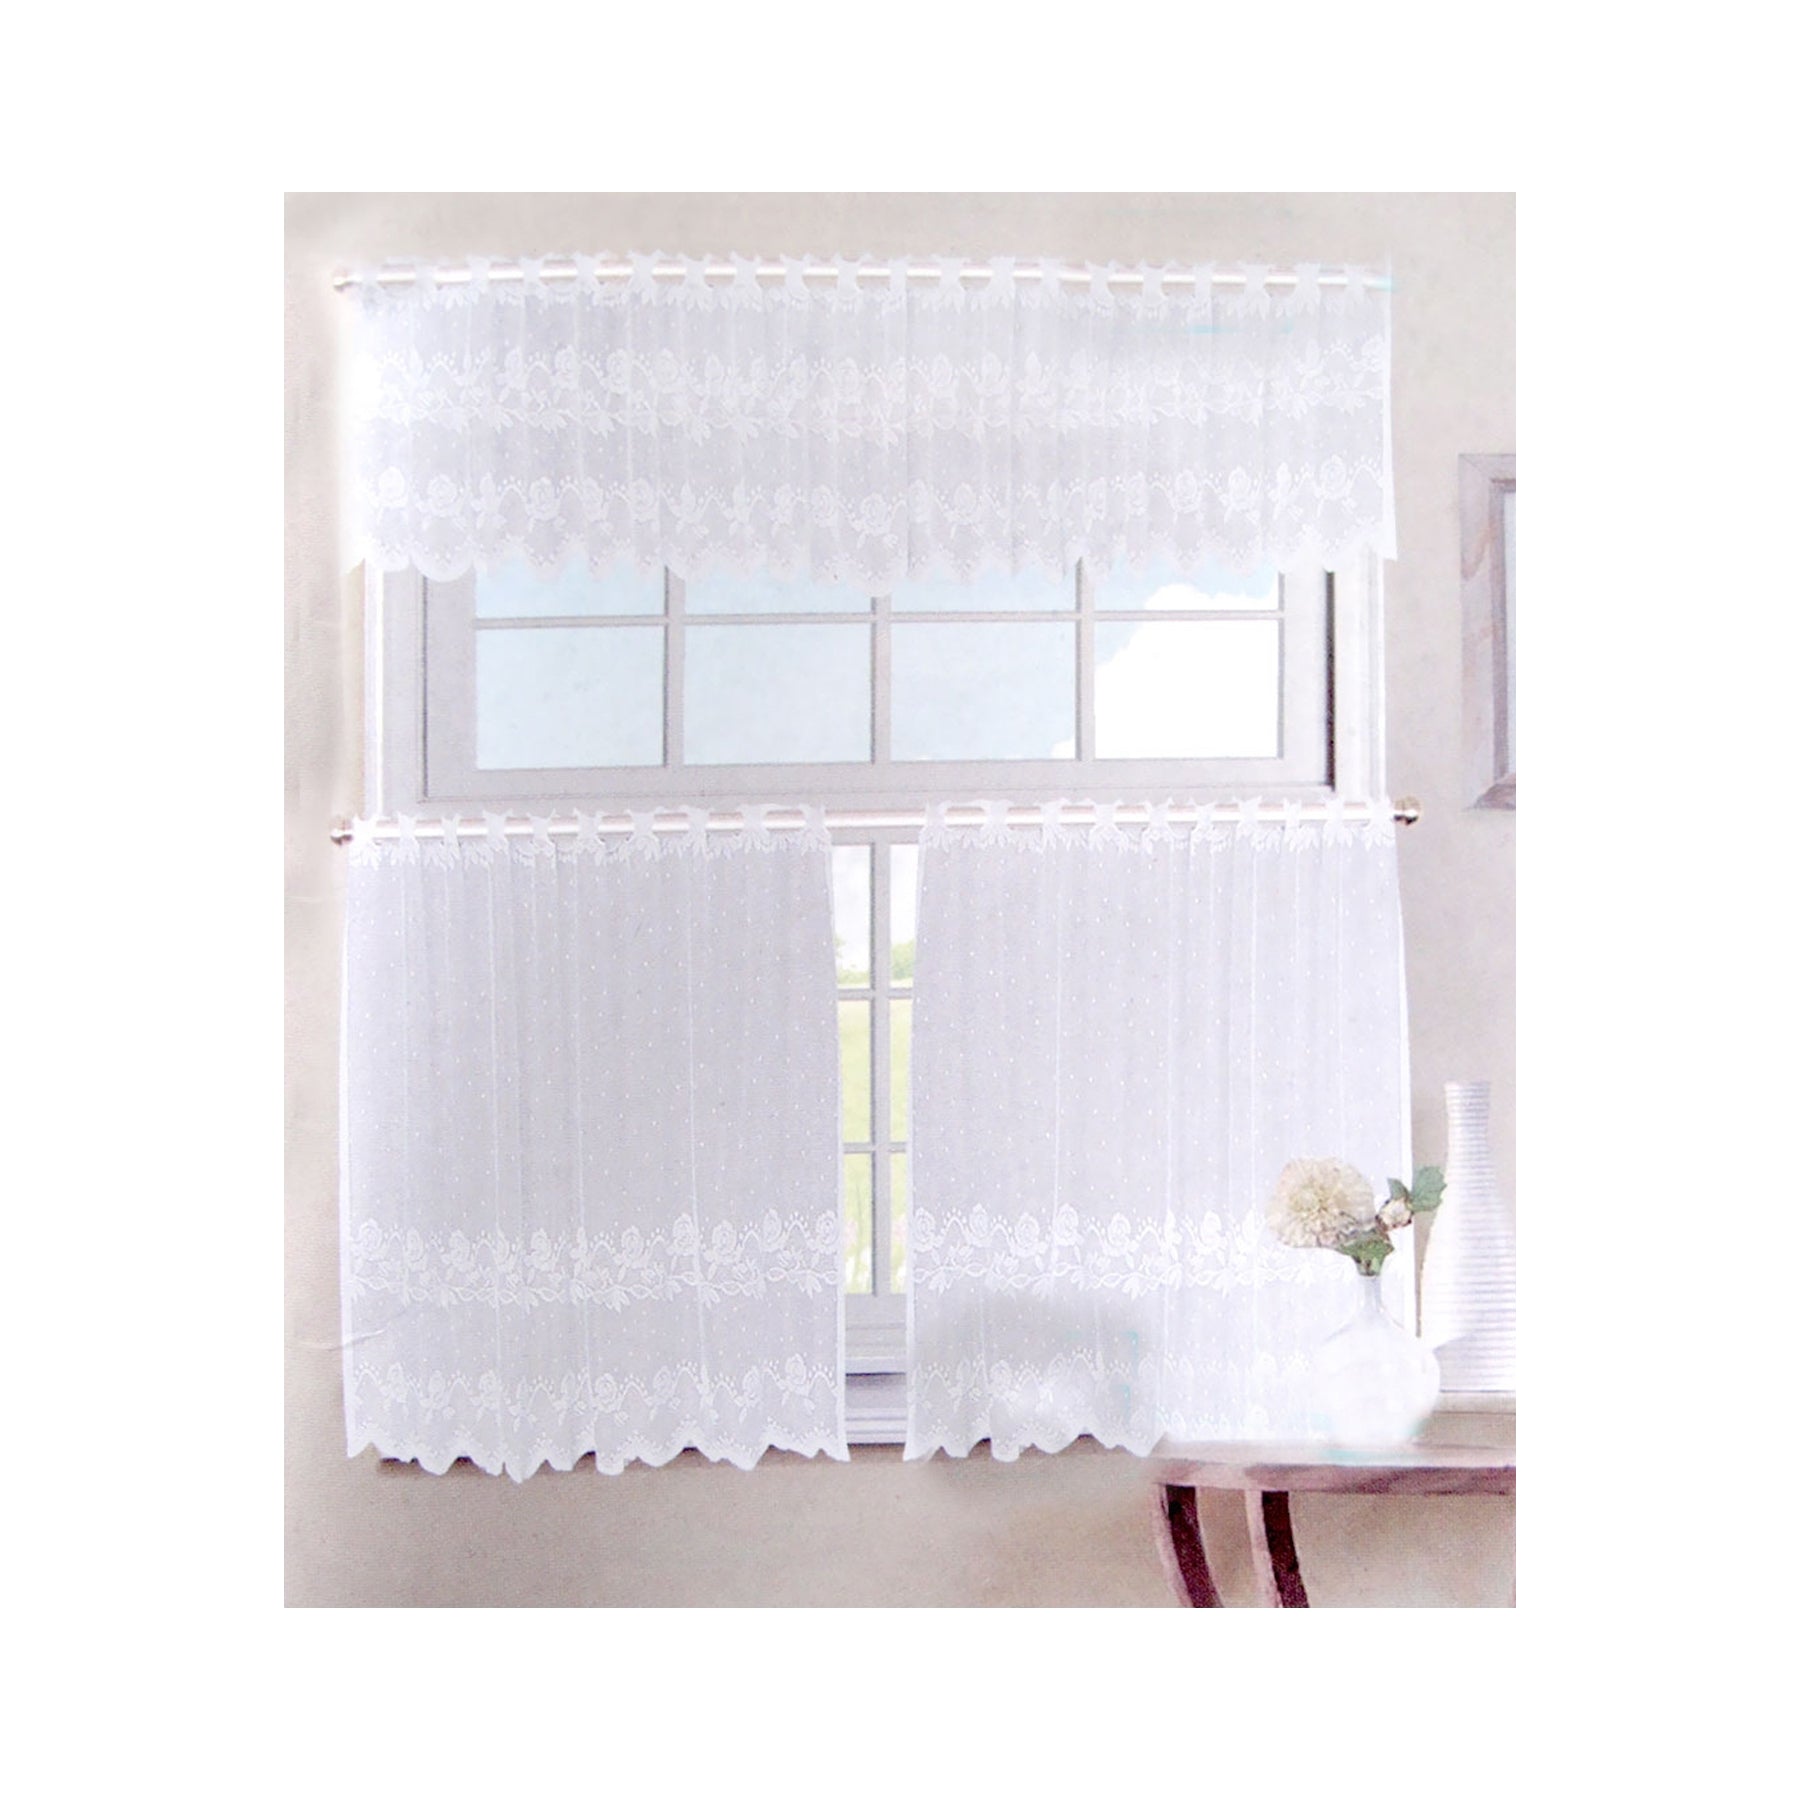 3 Pce Cafe Rose Lace Curtain Set - SILBERSHELL